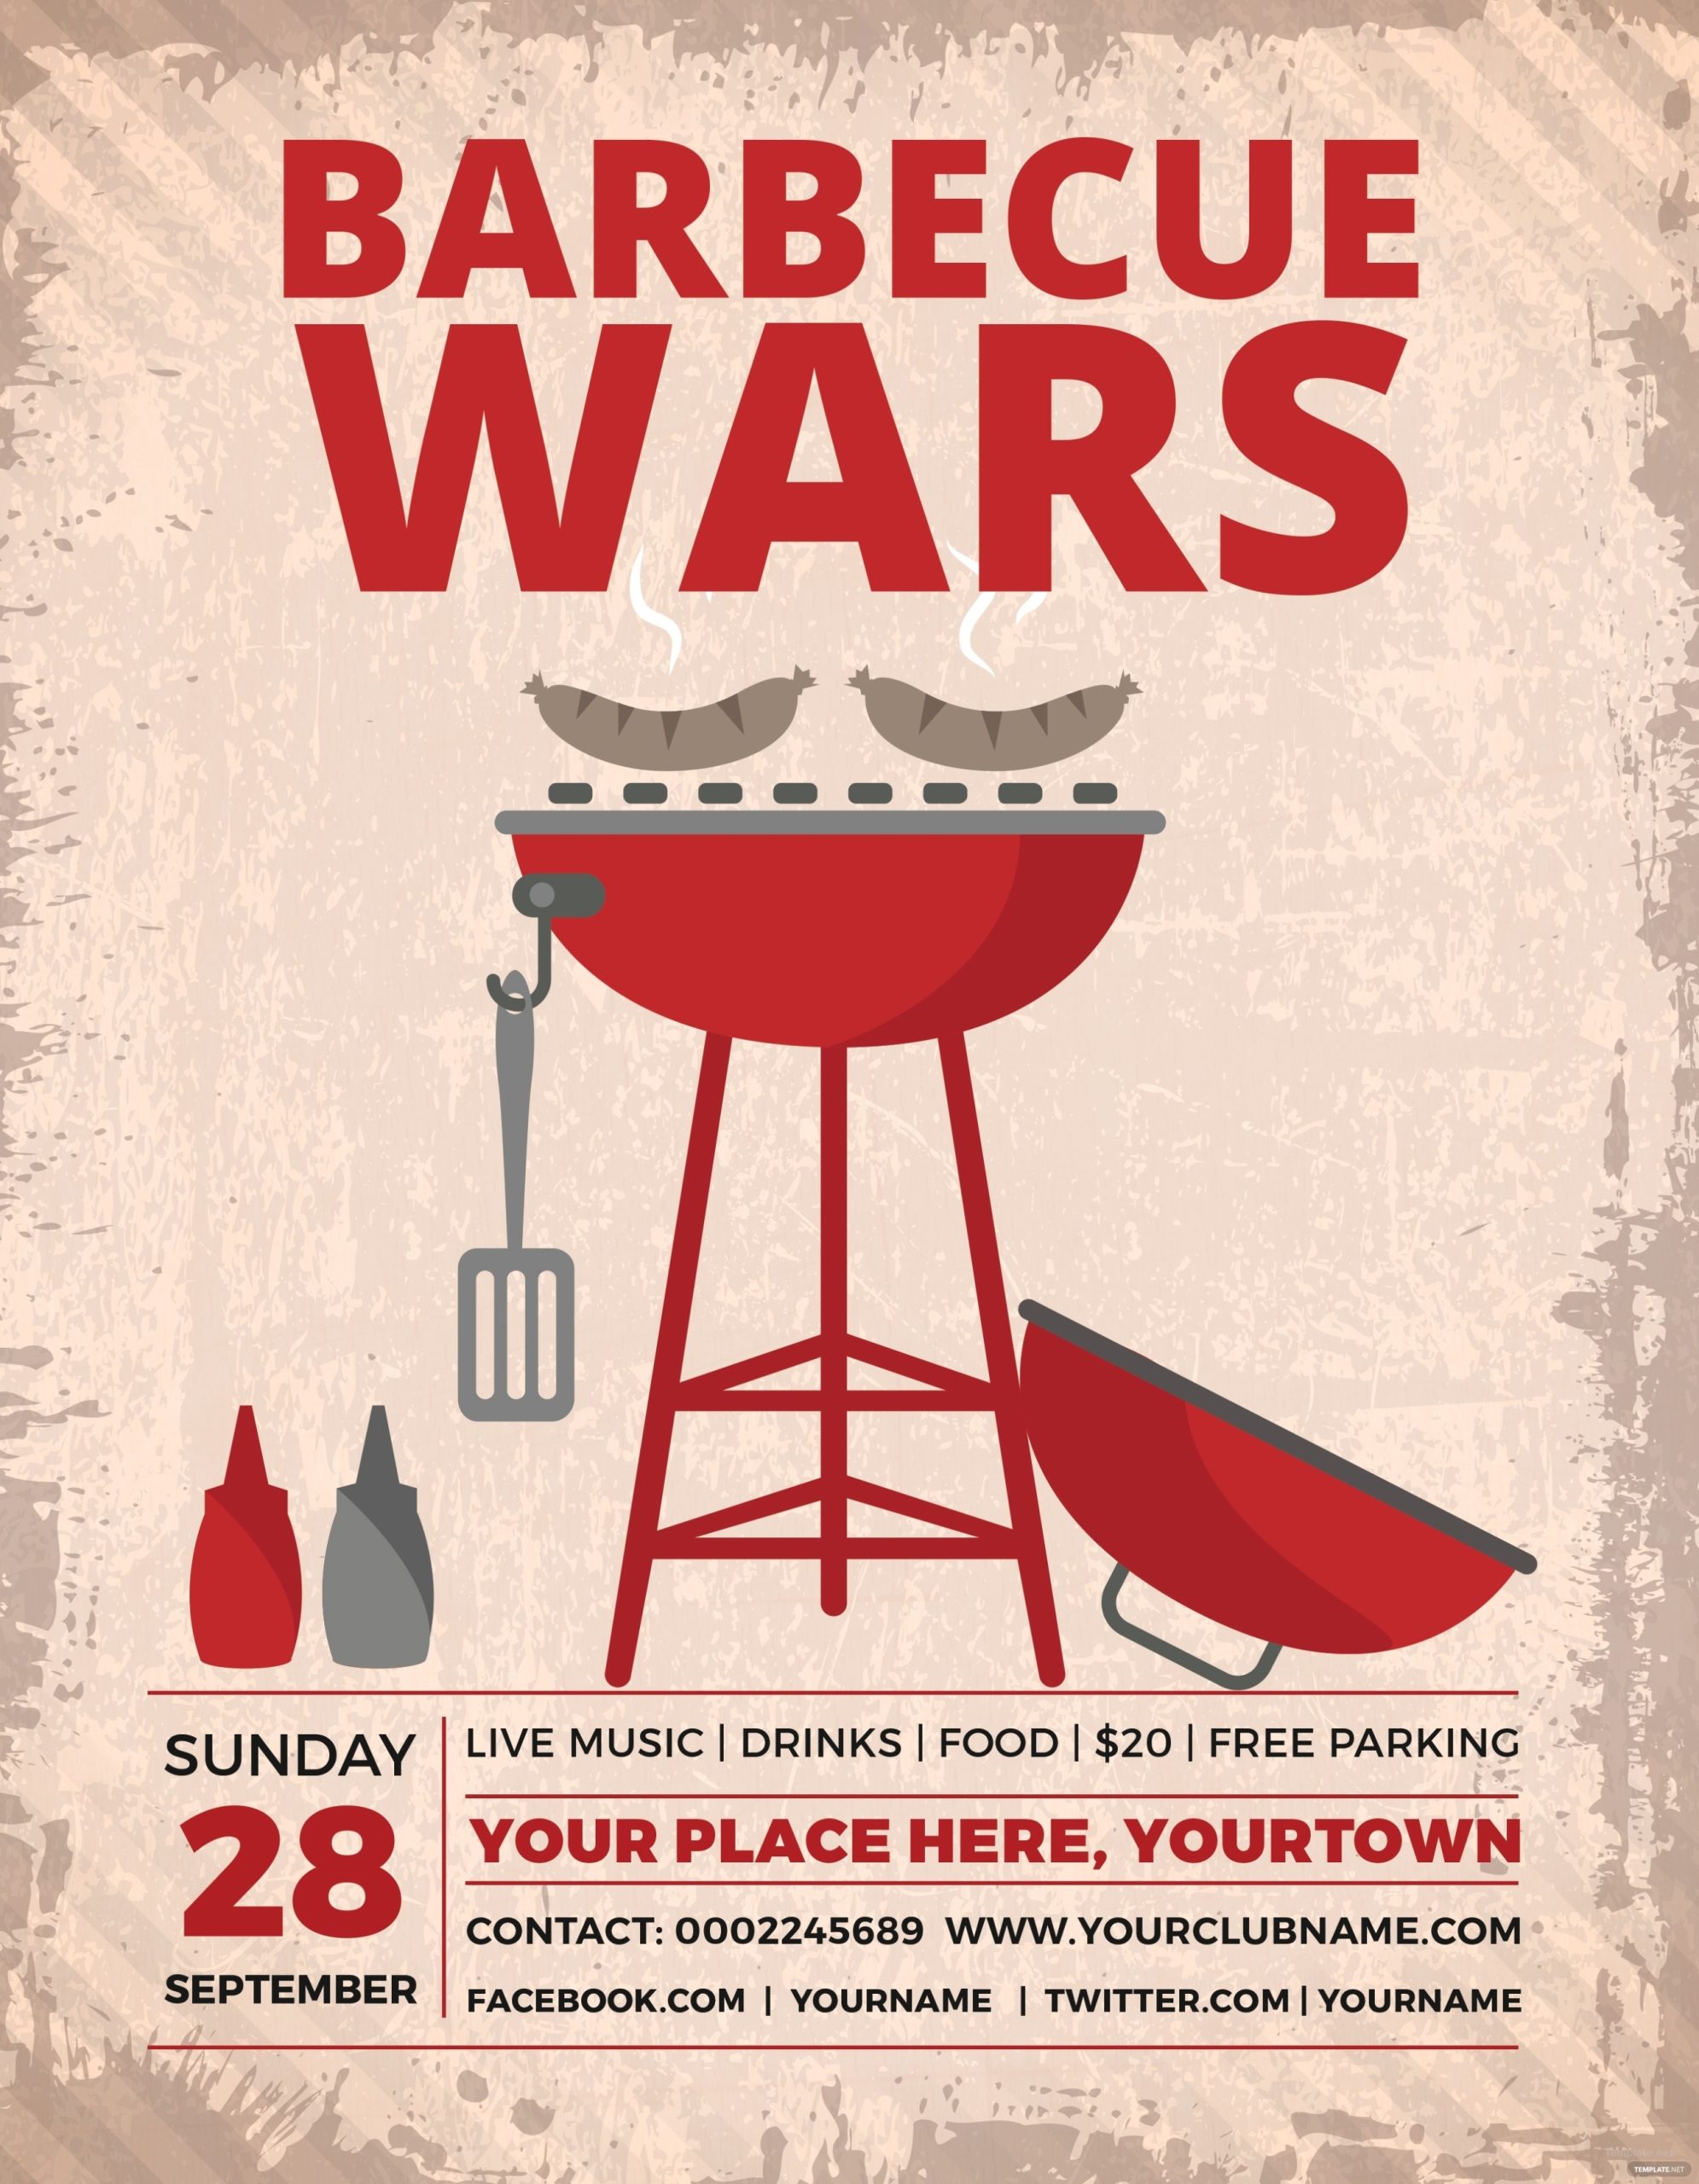 Free Bbq Wars Flyer Template In Adobe Photoshop, Illustrator, Microsoft With Regard To Free Bbq Flyer Template